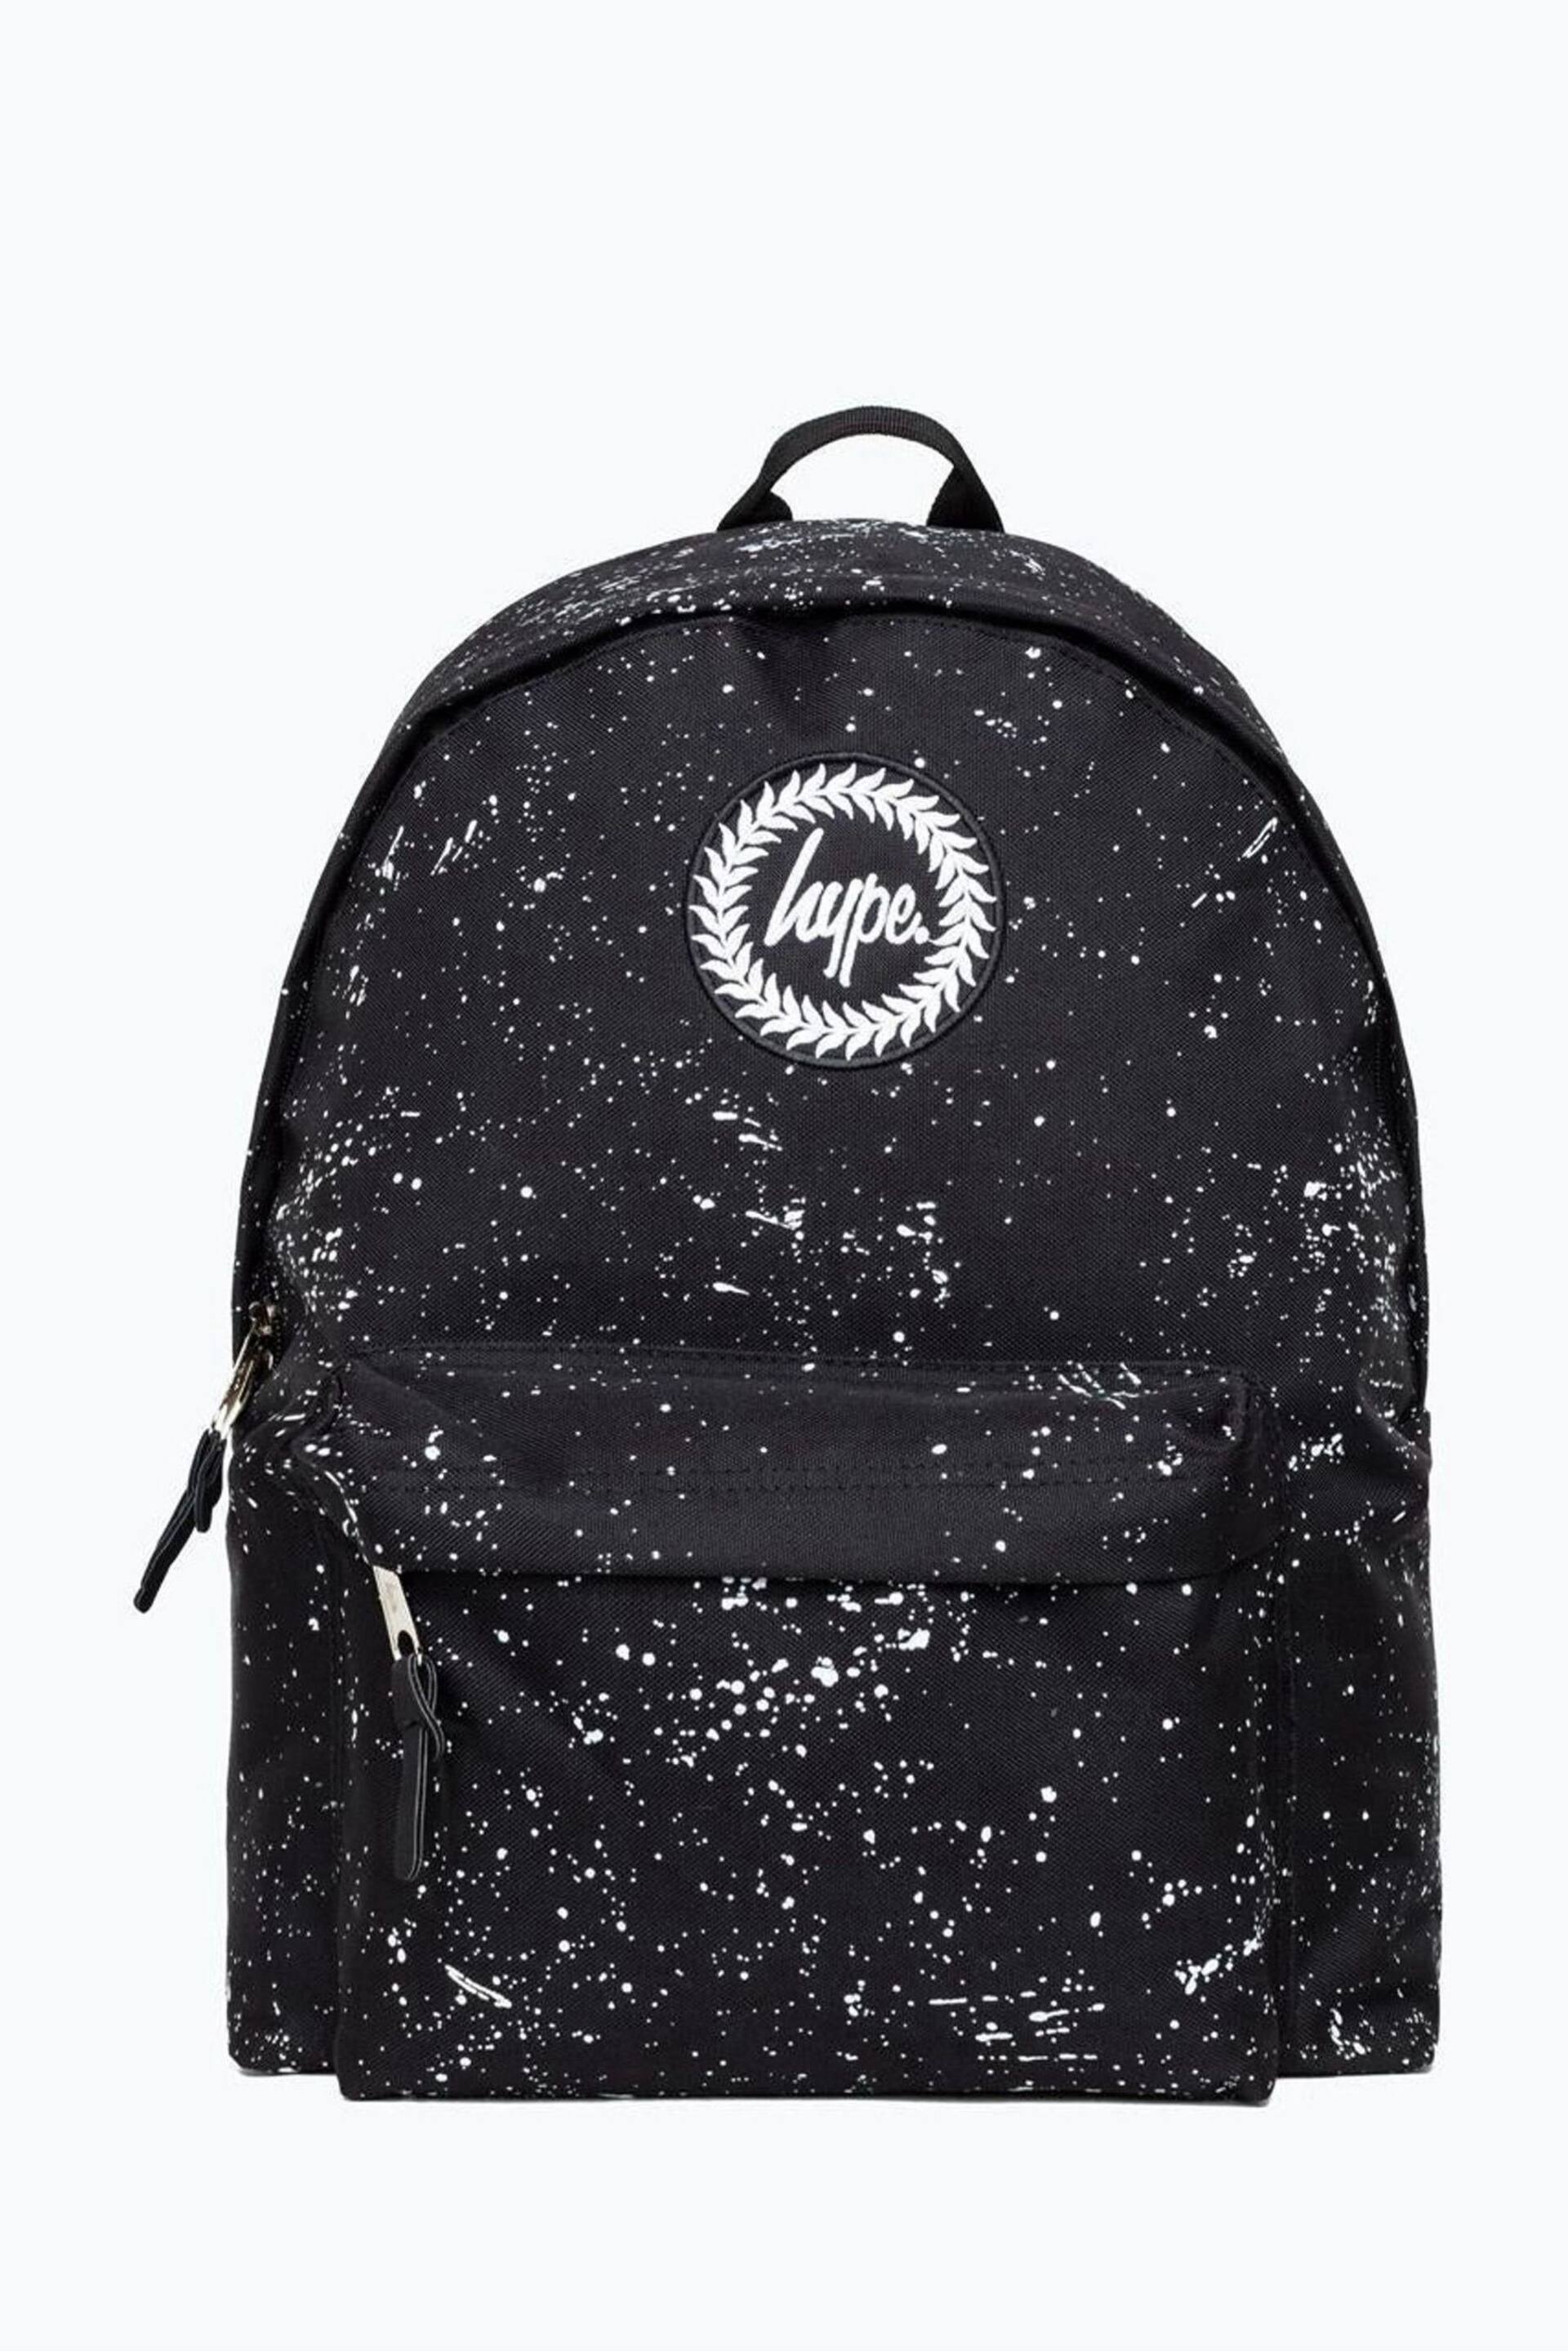 Hype. Speckle Badge Backpack - Image 1 of 1